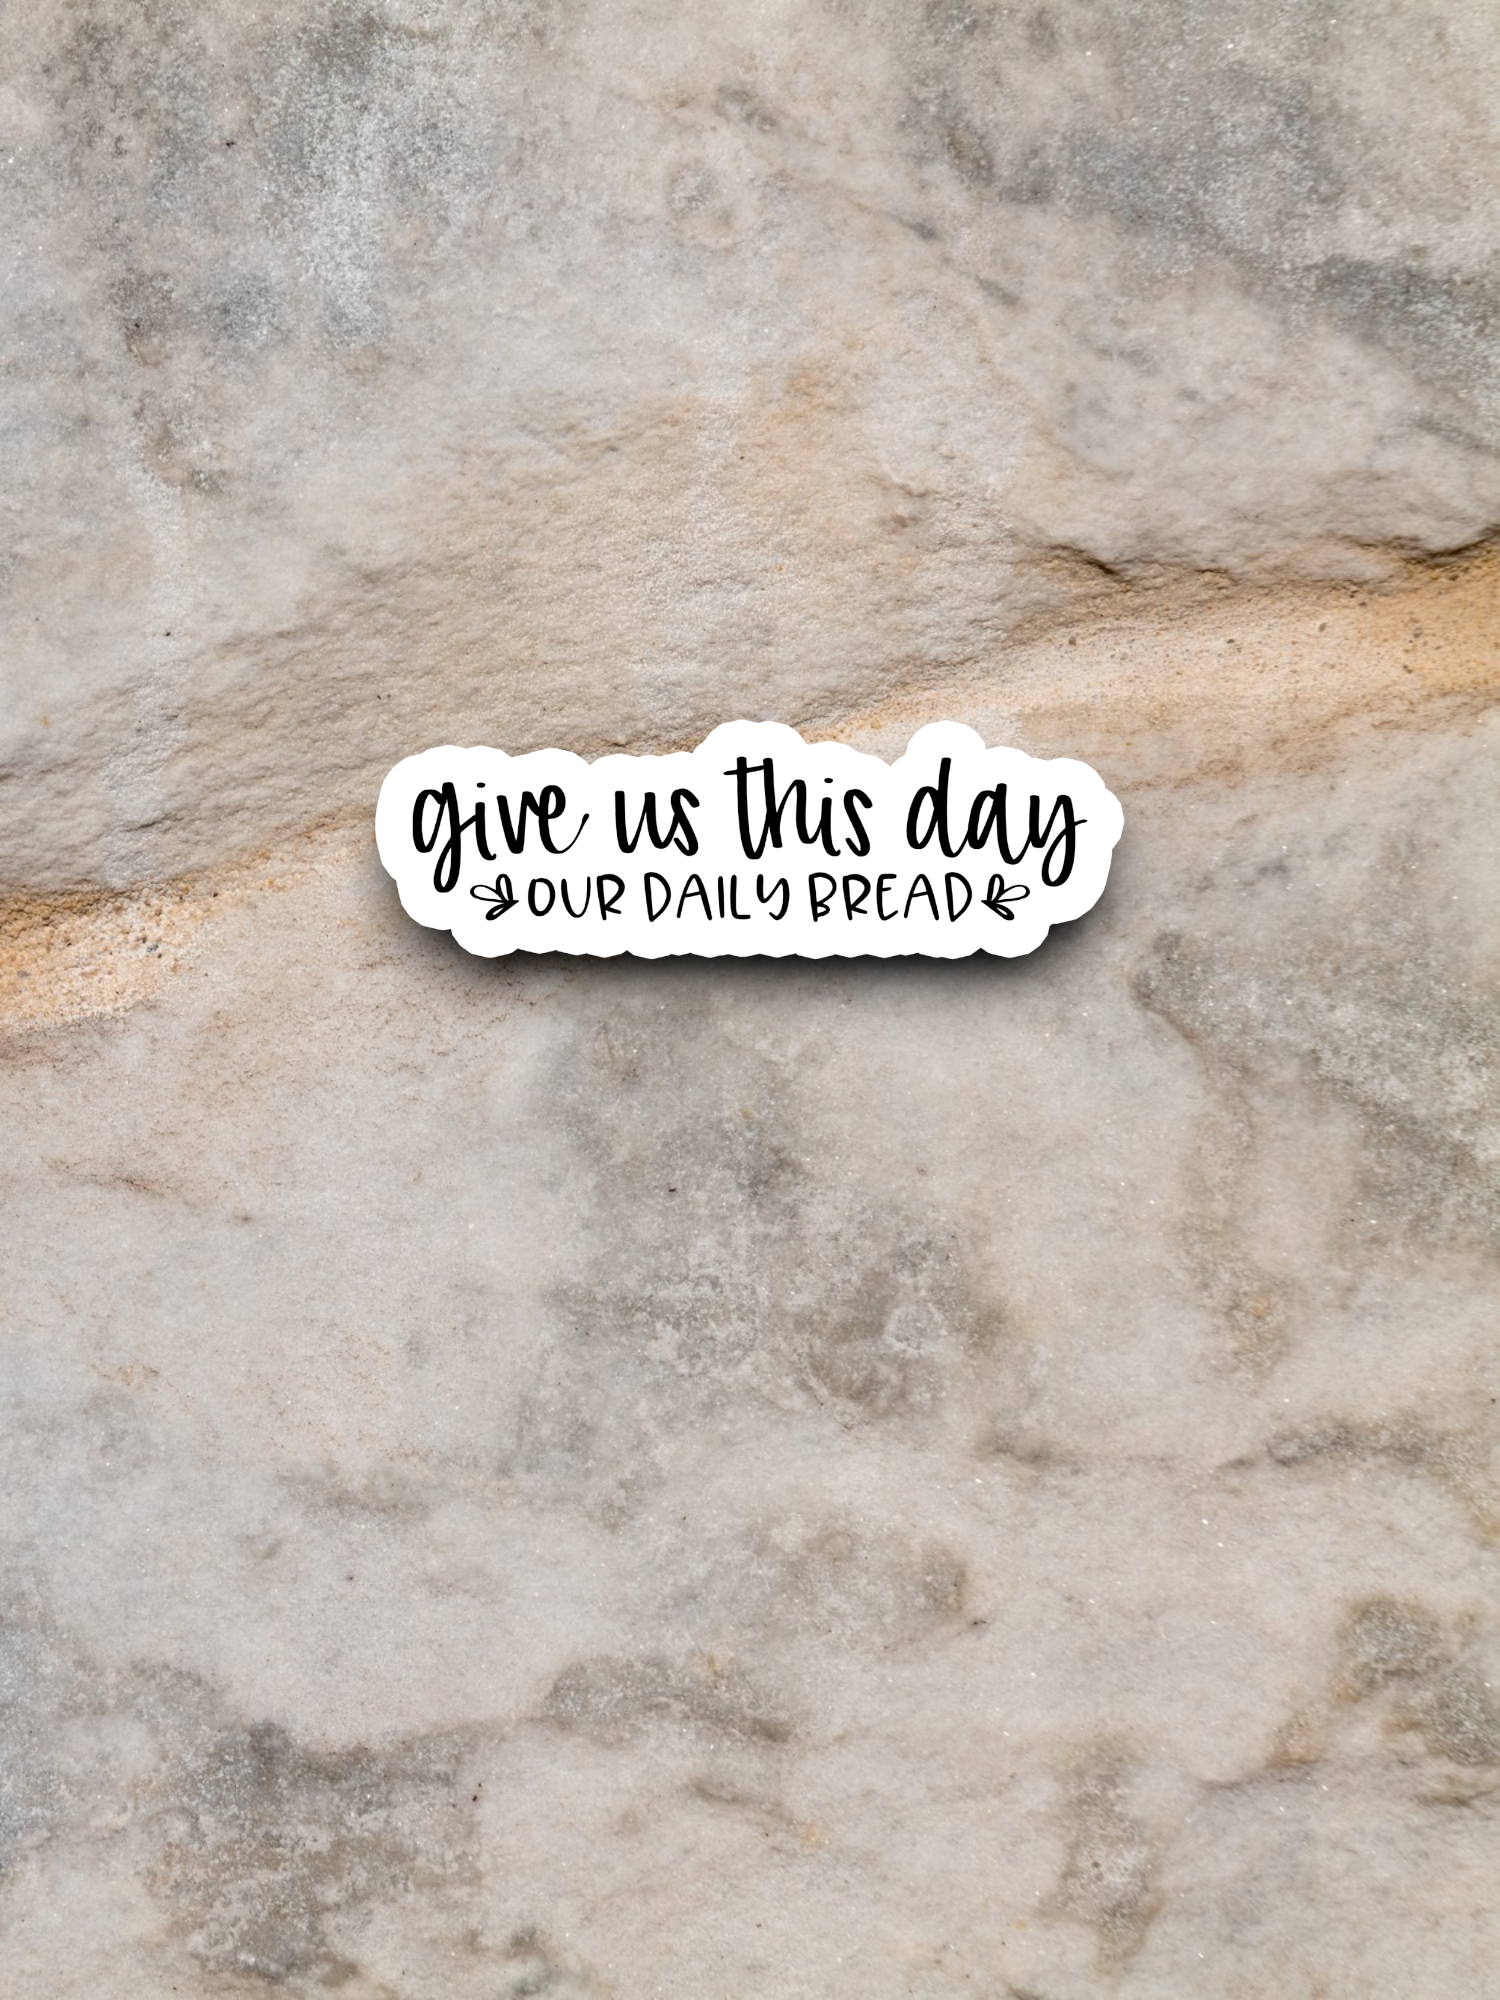 Give Us This Day Our Daily Bread - Faith Sticker